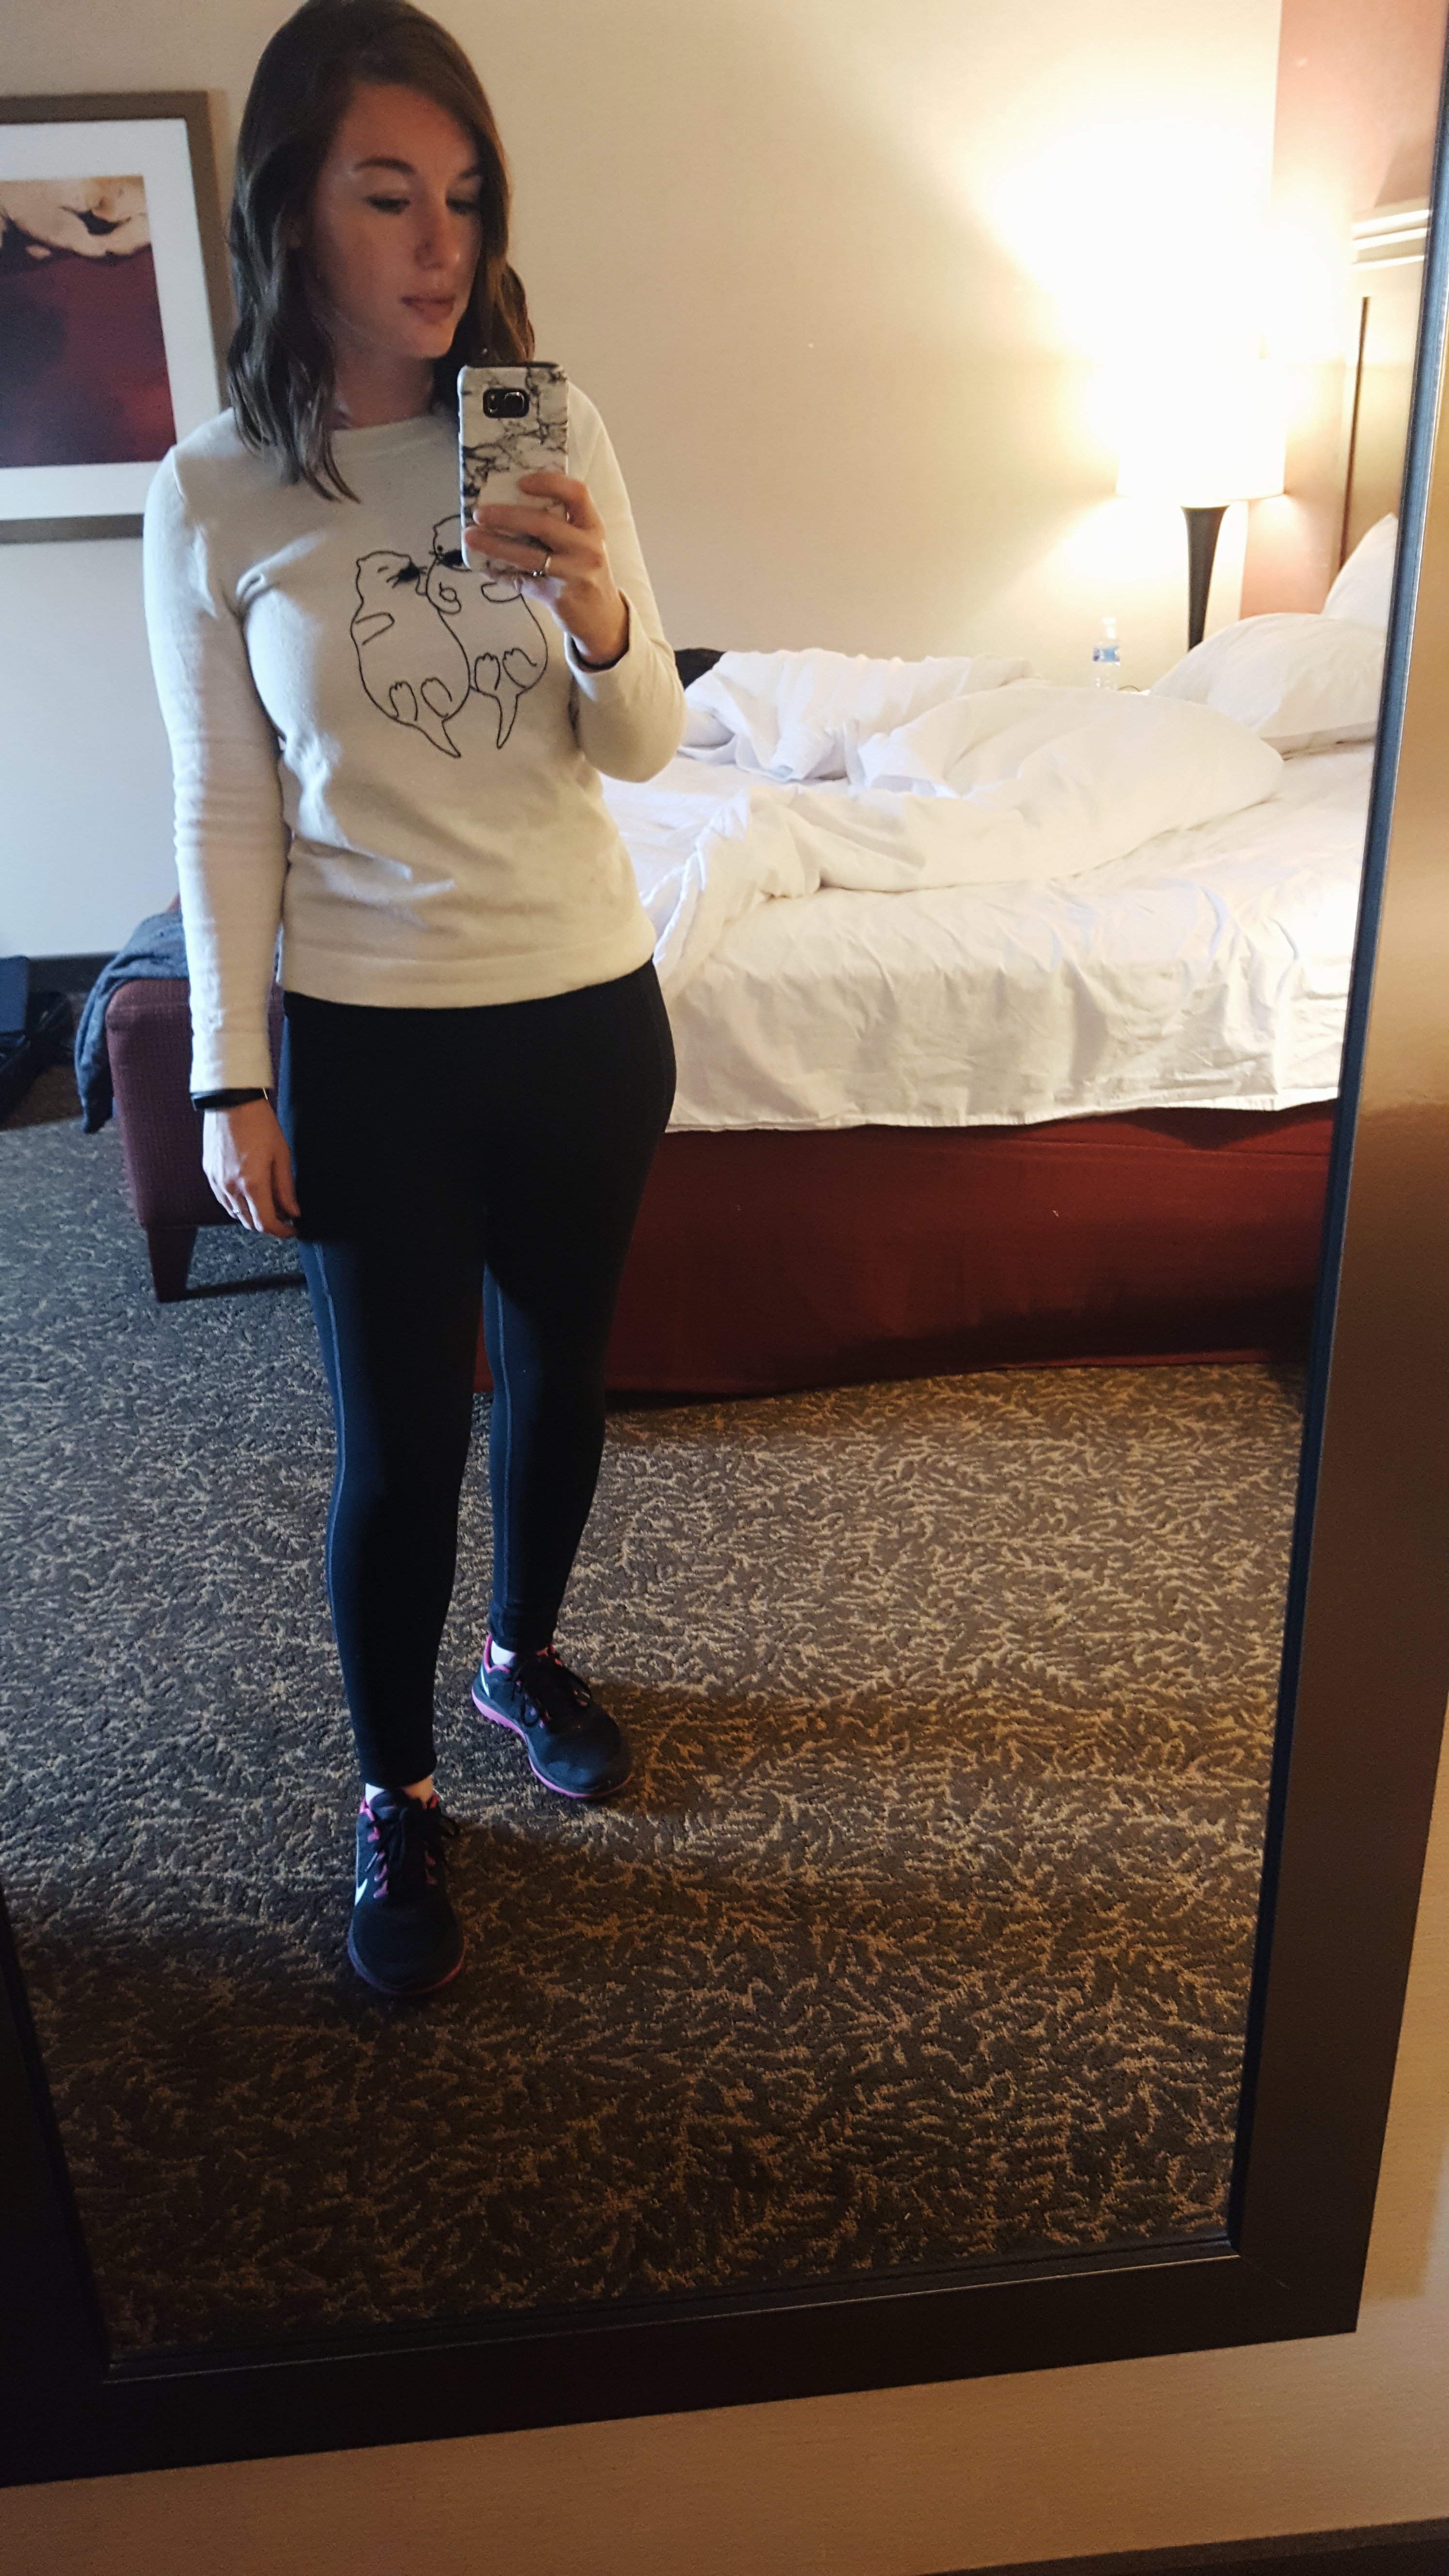 Alyssa wears an otter sweater with leggings and sneakers